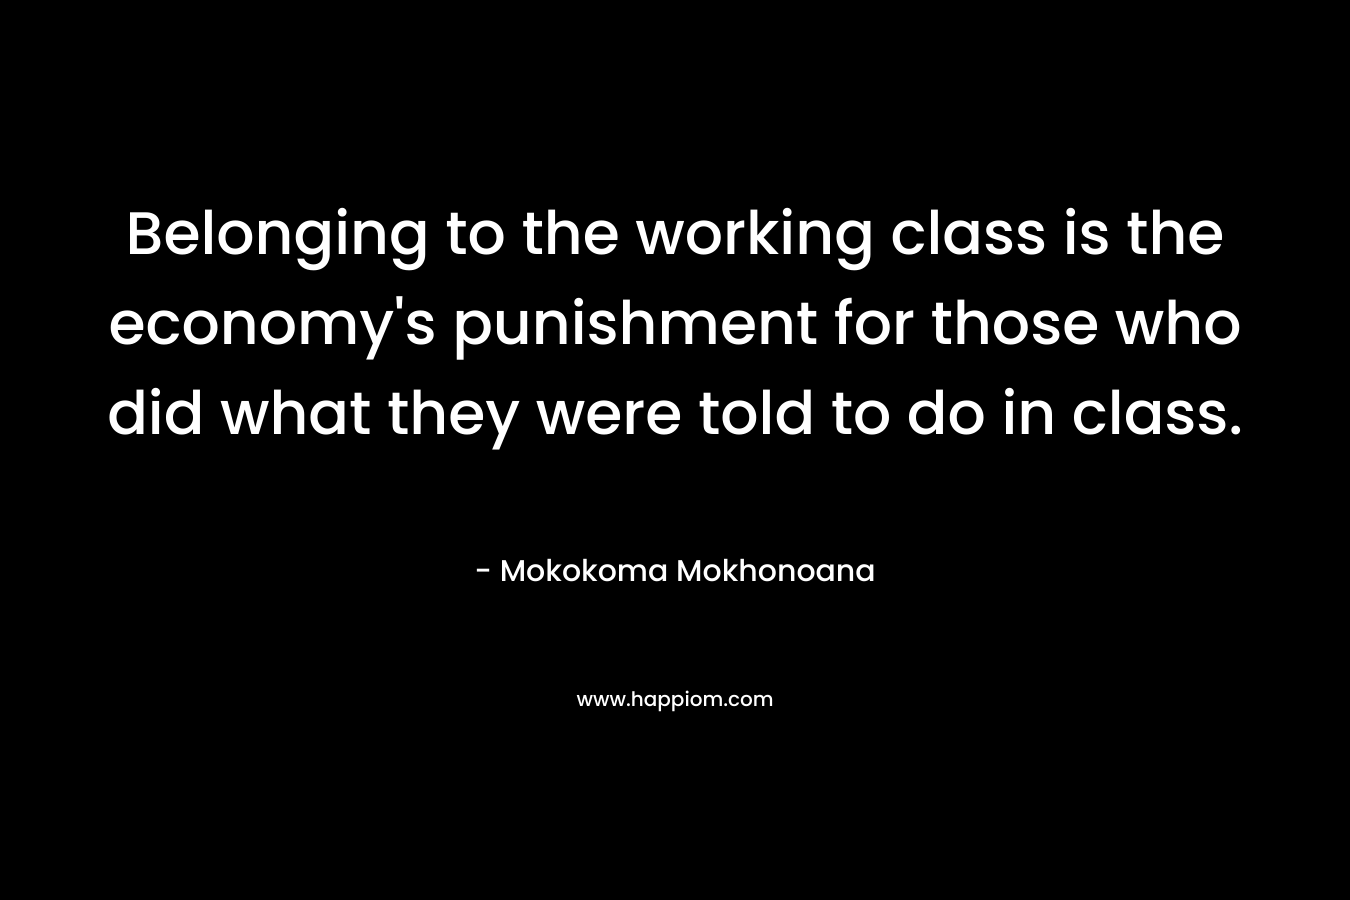 Belonging to the working class is the economy’s punishment for those who did what they were told to do in class. – Mokokoma Mokhonoana